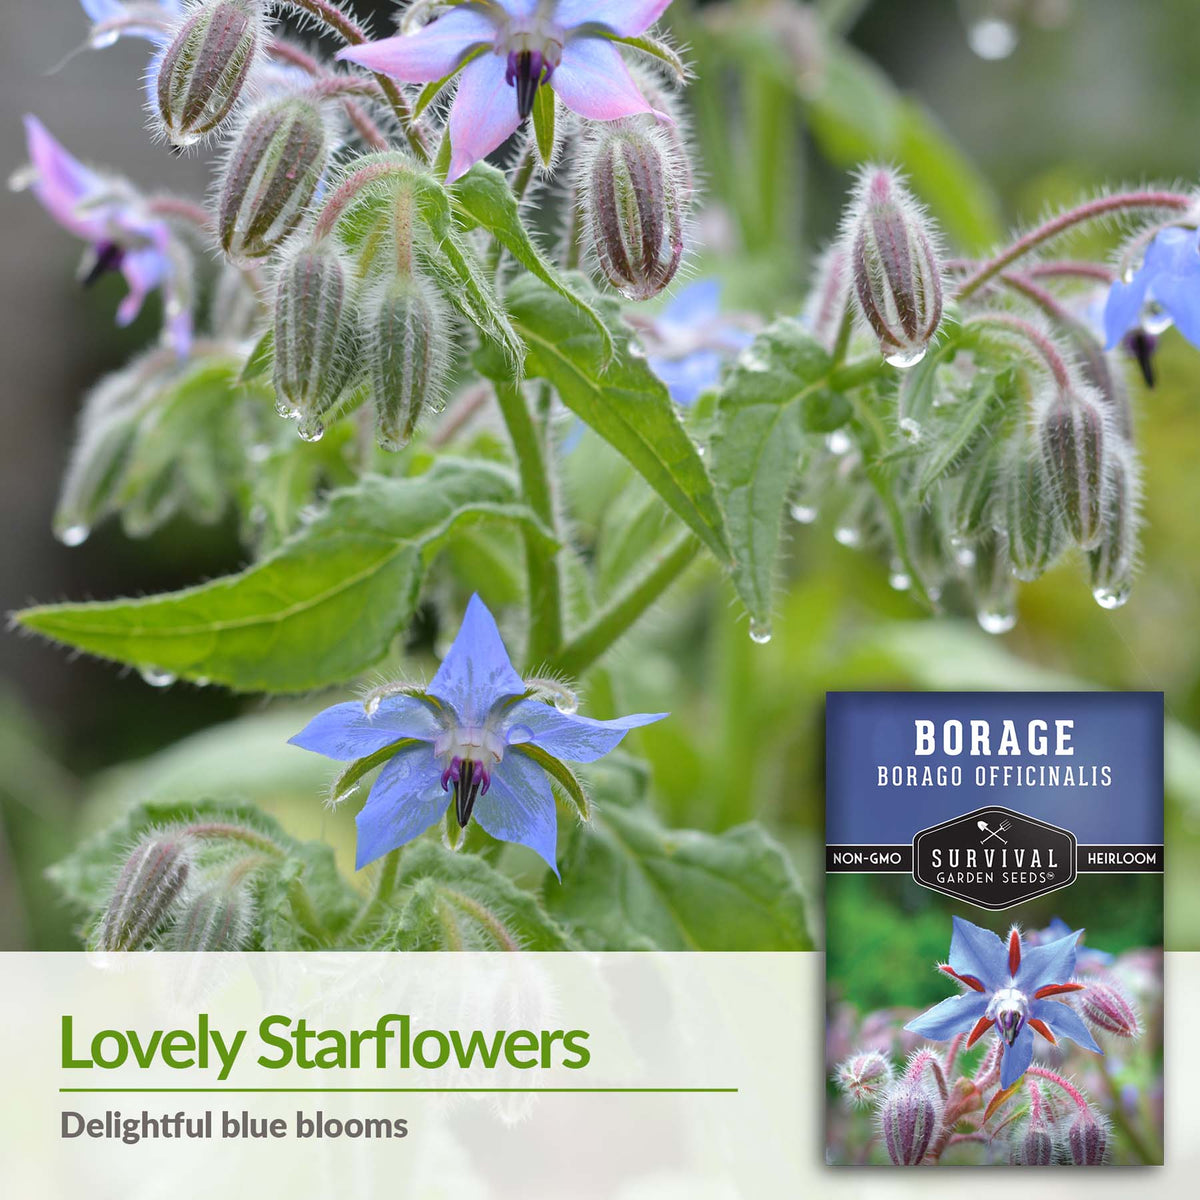 Borage produces a lovely blue star shaped flower